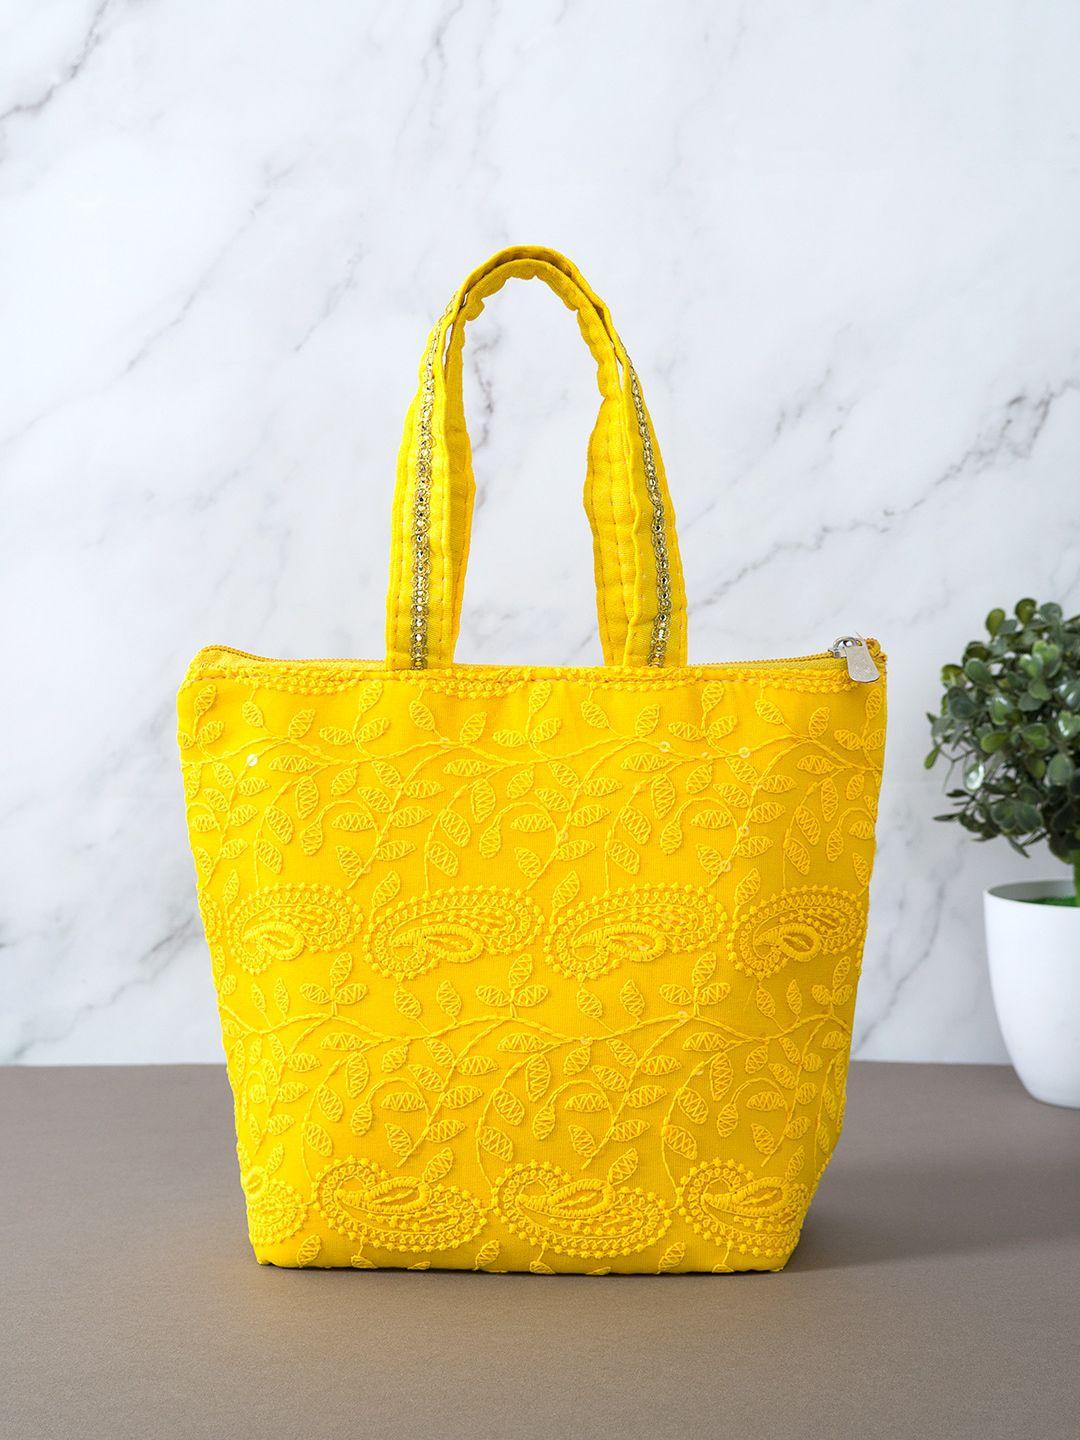 golden peacock yellow embroidered shopper tote bag